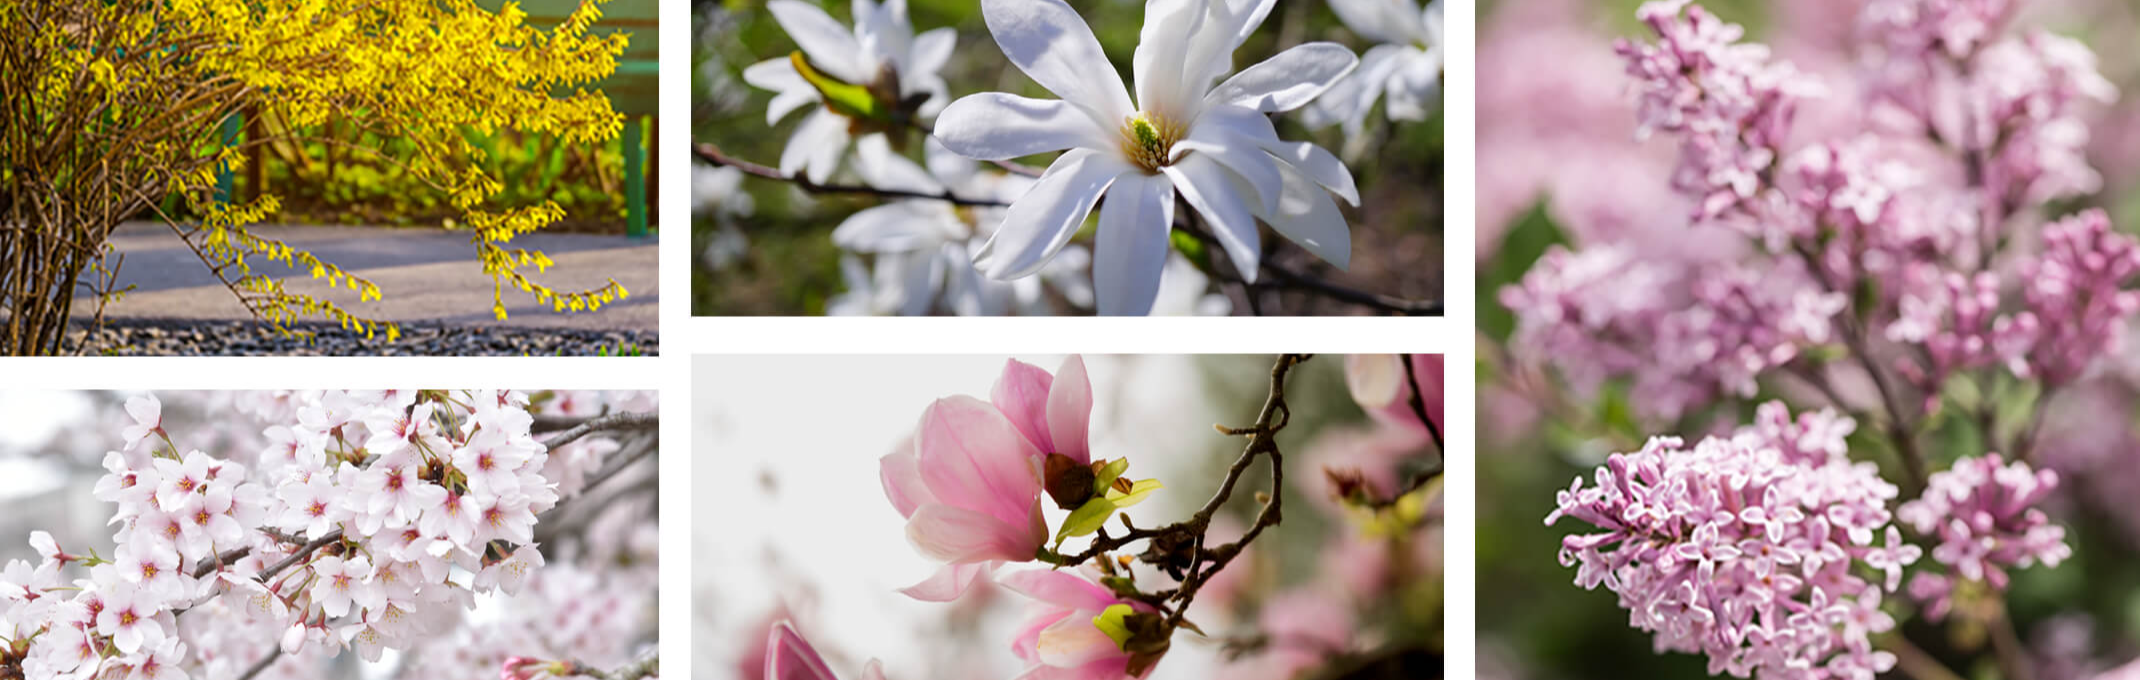 flowering trees and shrubs for the bay area, lilacs, cherry trees, forsythia, magnolia